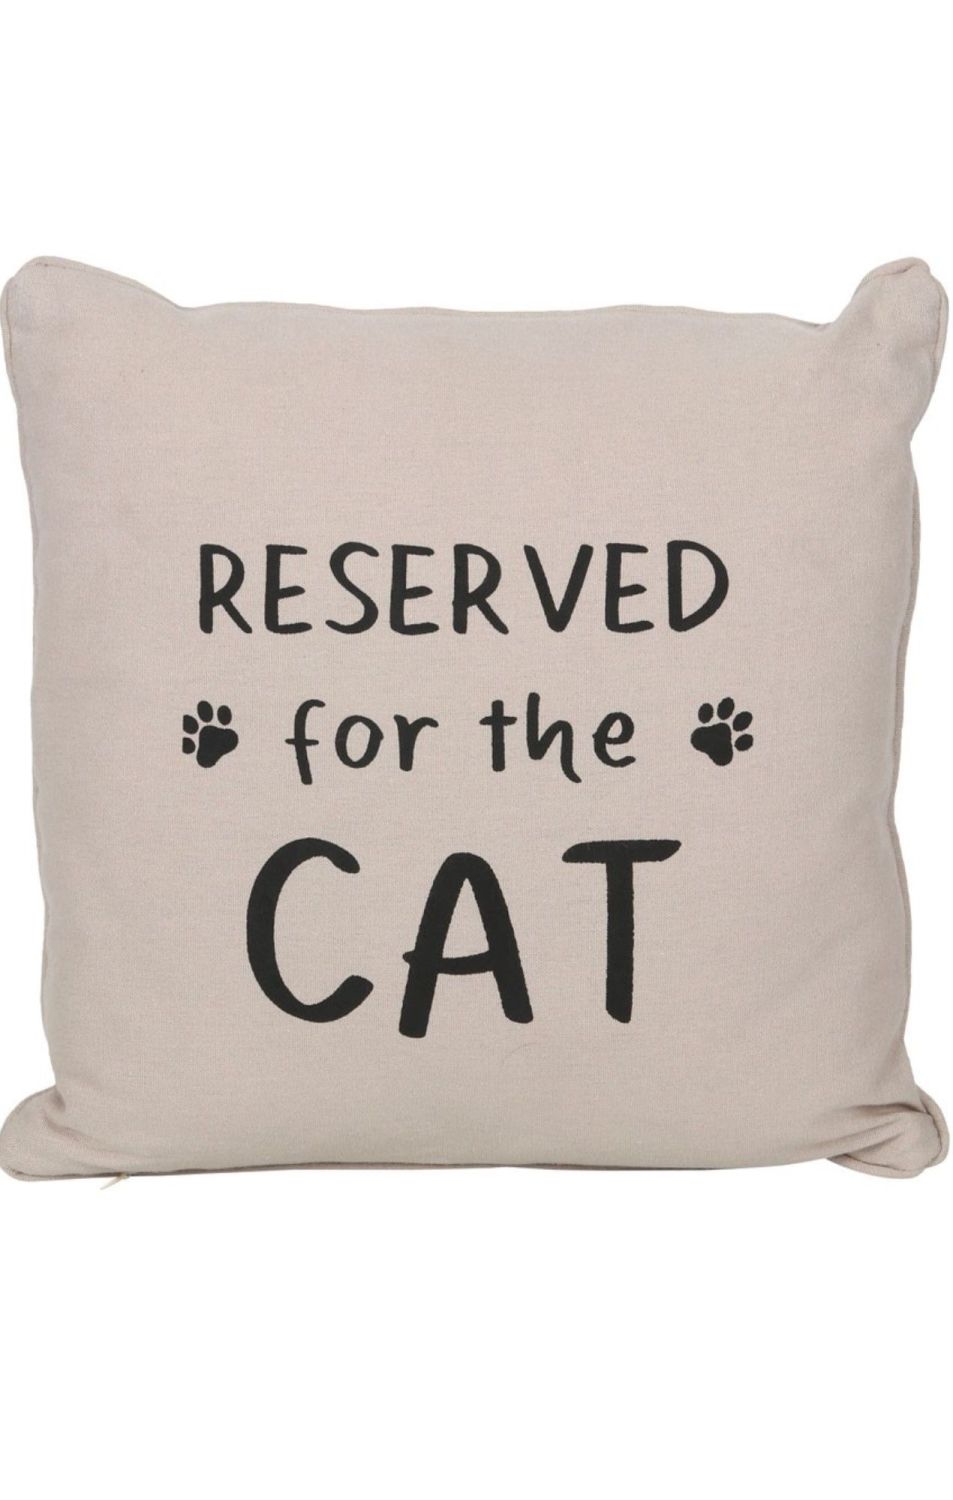 Reserved for the cat cushion RRP £14.99